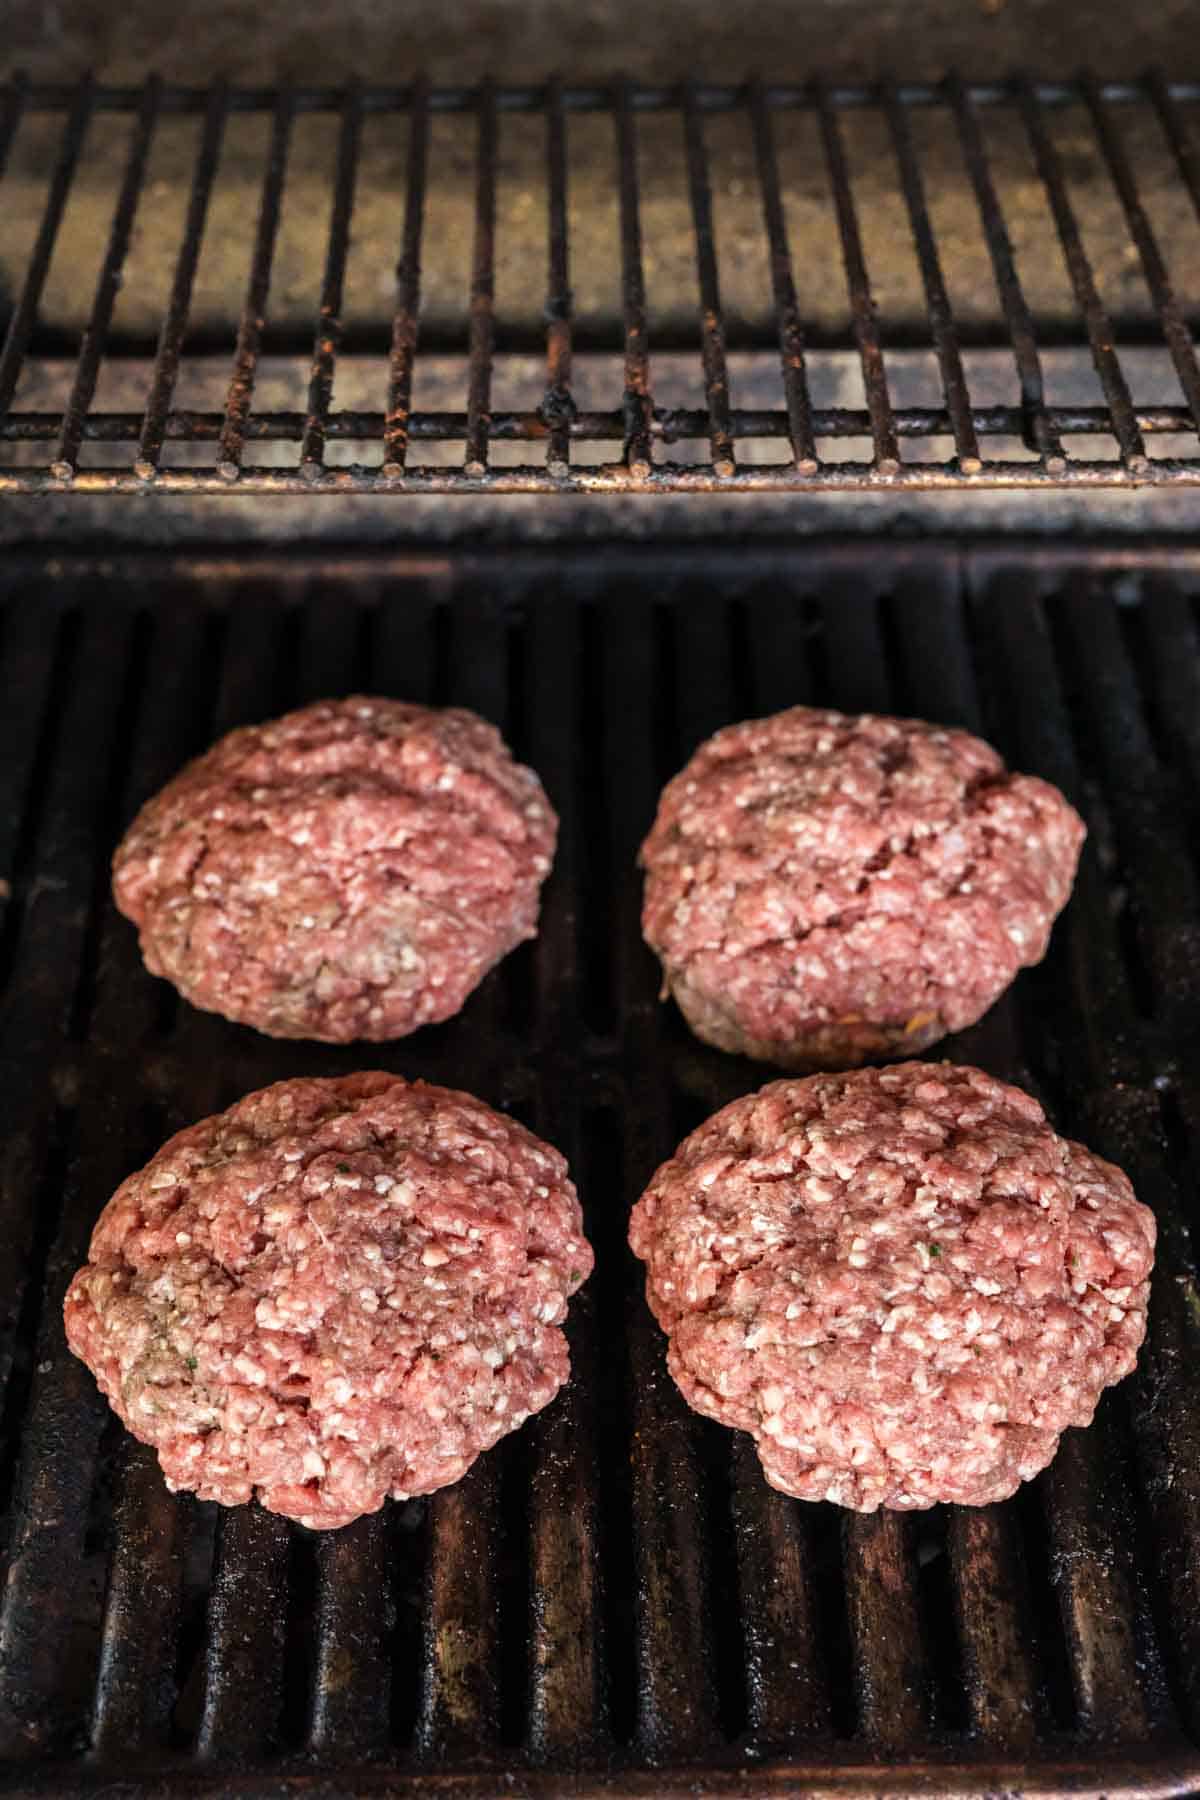 Place ground beef patties on the grill